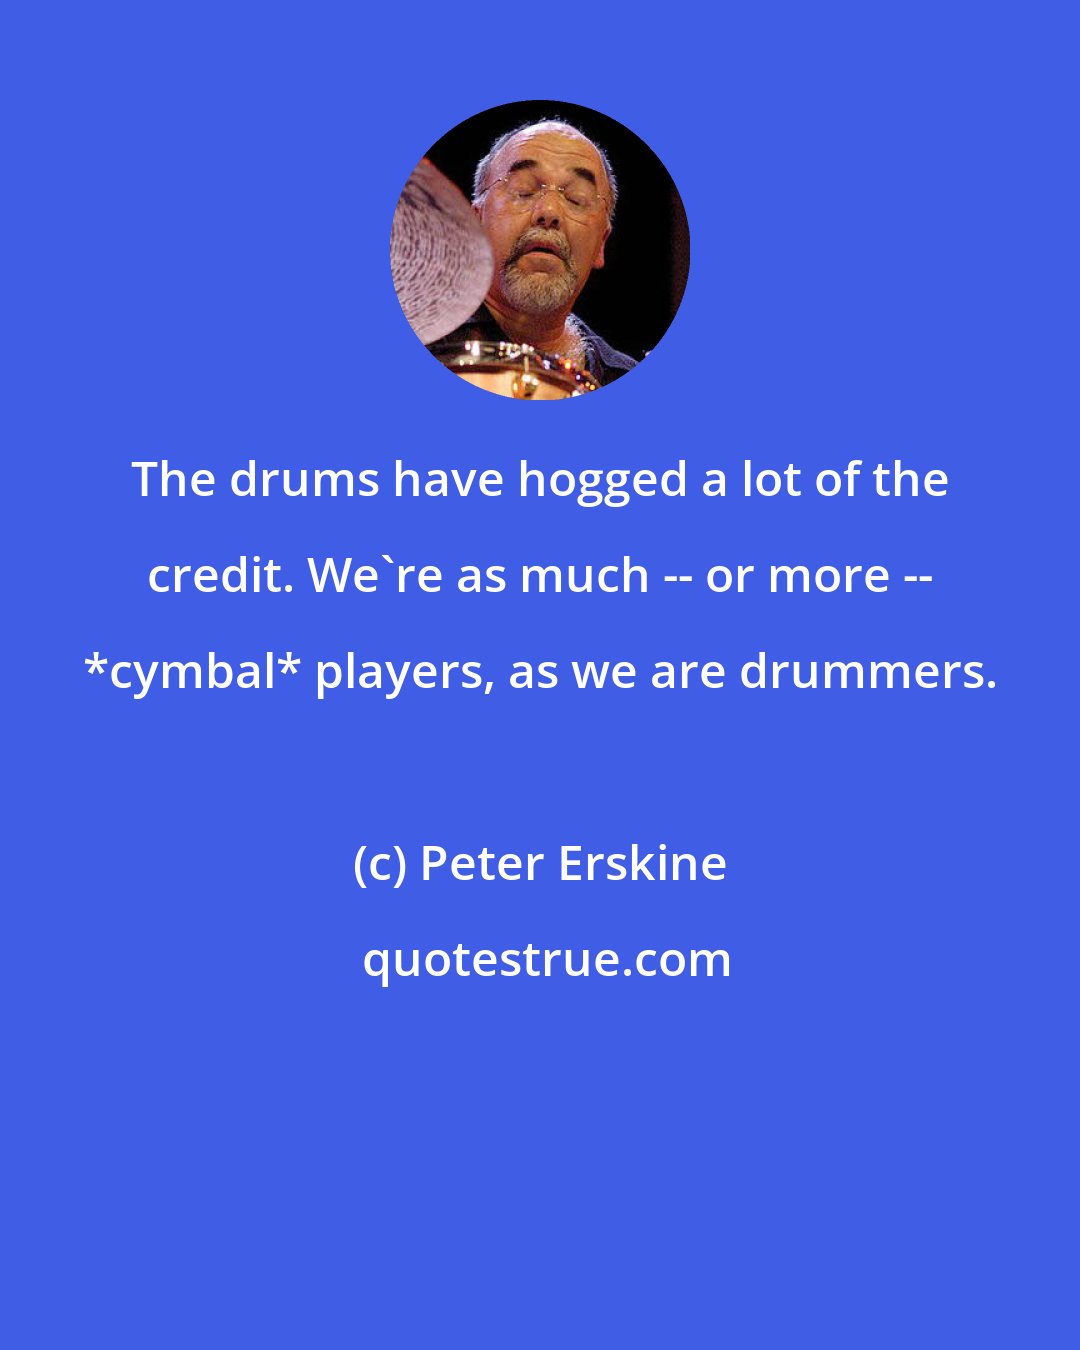 Peter Erskine: The drums have hogged a lot of the credit. We're as much -- or more -- *cymbal* players, as we are drummers.